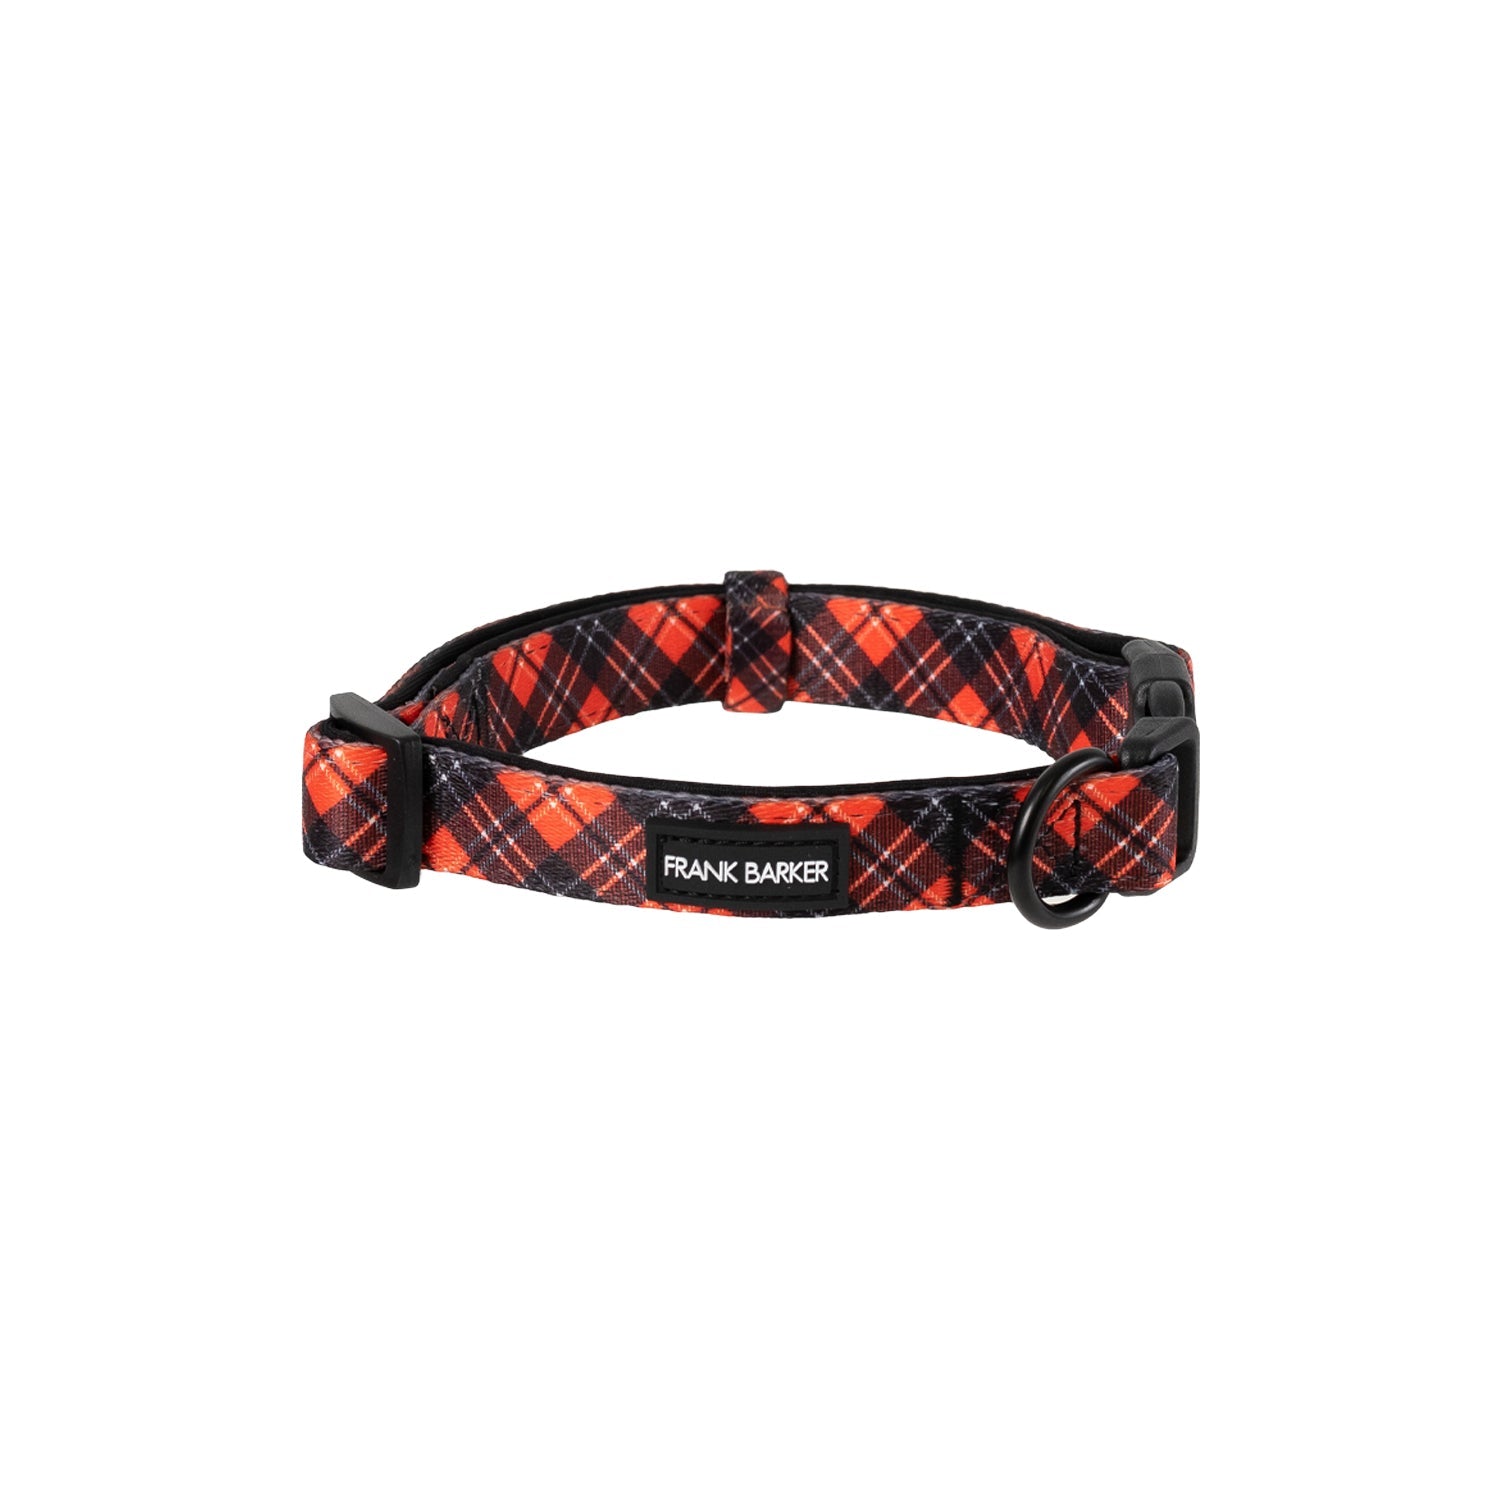 Available in 4 sizes, this cute, stylish tartan collar is the perfect new accessory for your beloved pet. With a clip-in-clasp closure, an adjustable slider to fit dogs of all sizes and cushioned neoprene lining for comfort, Frank Barker Collars are designed to be lightweight and functional.